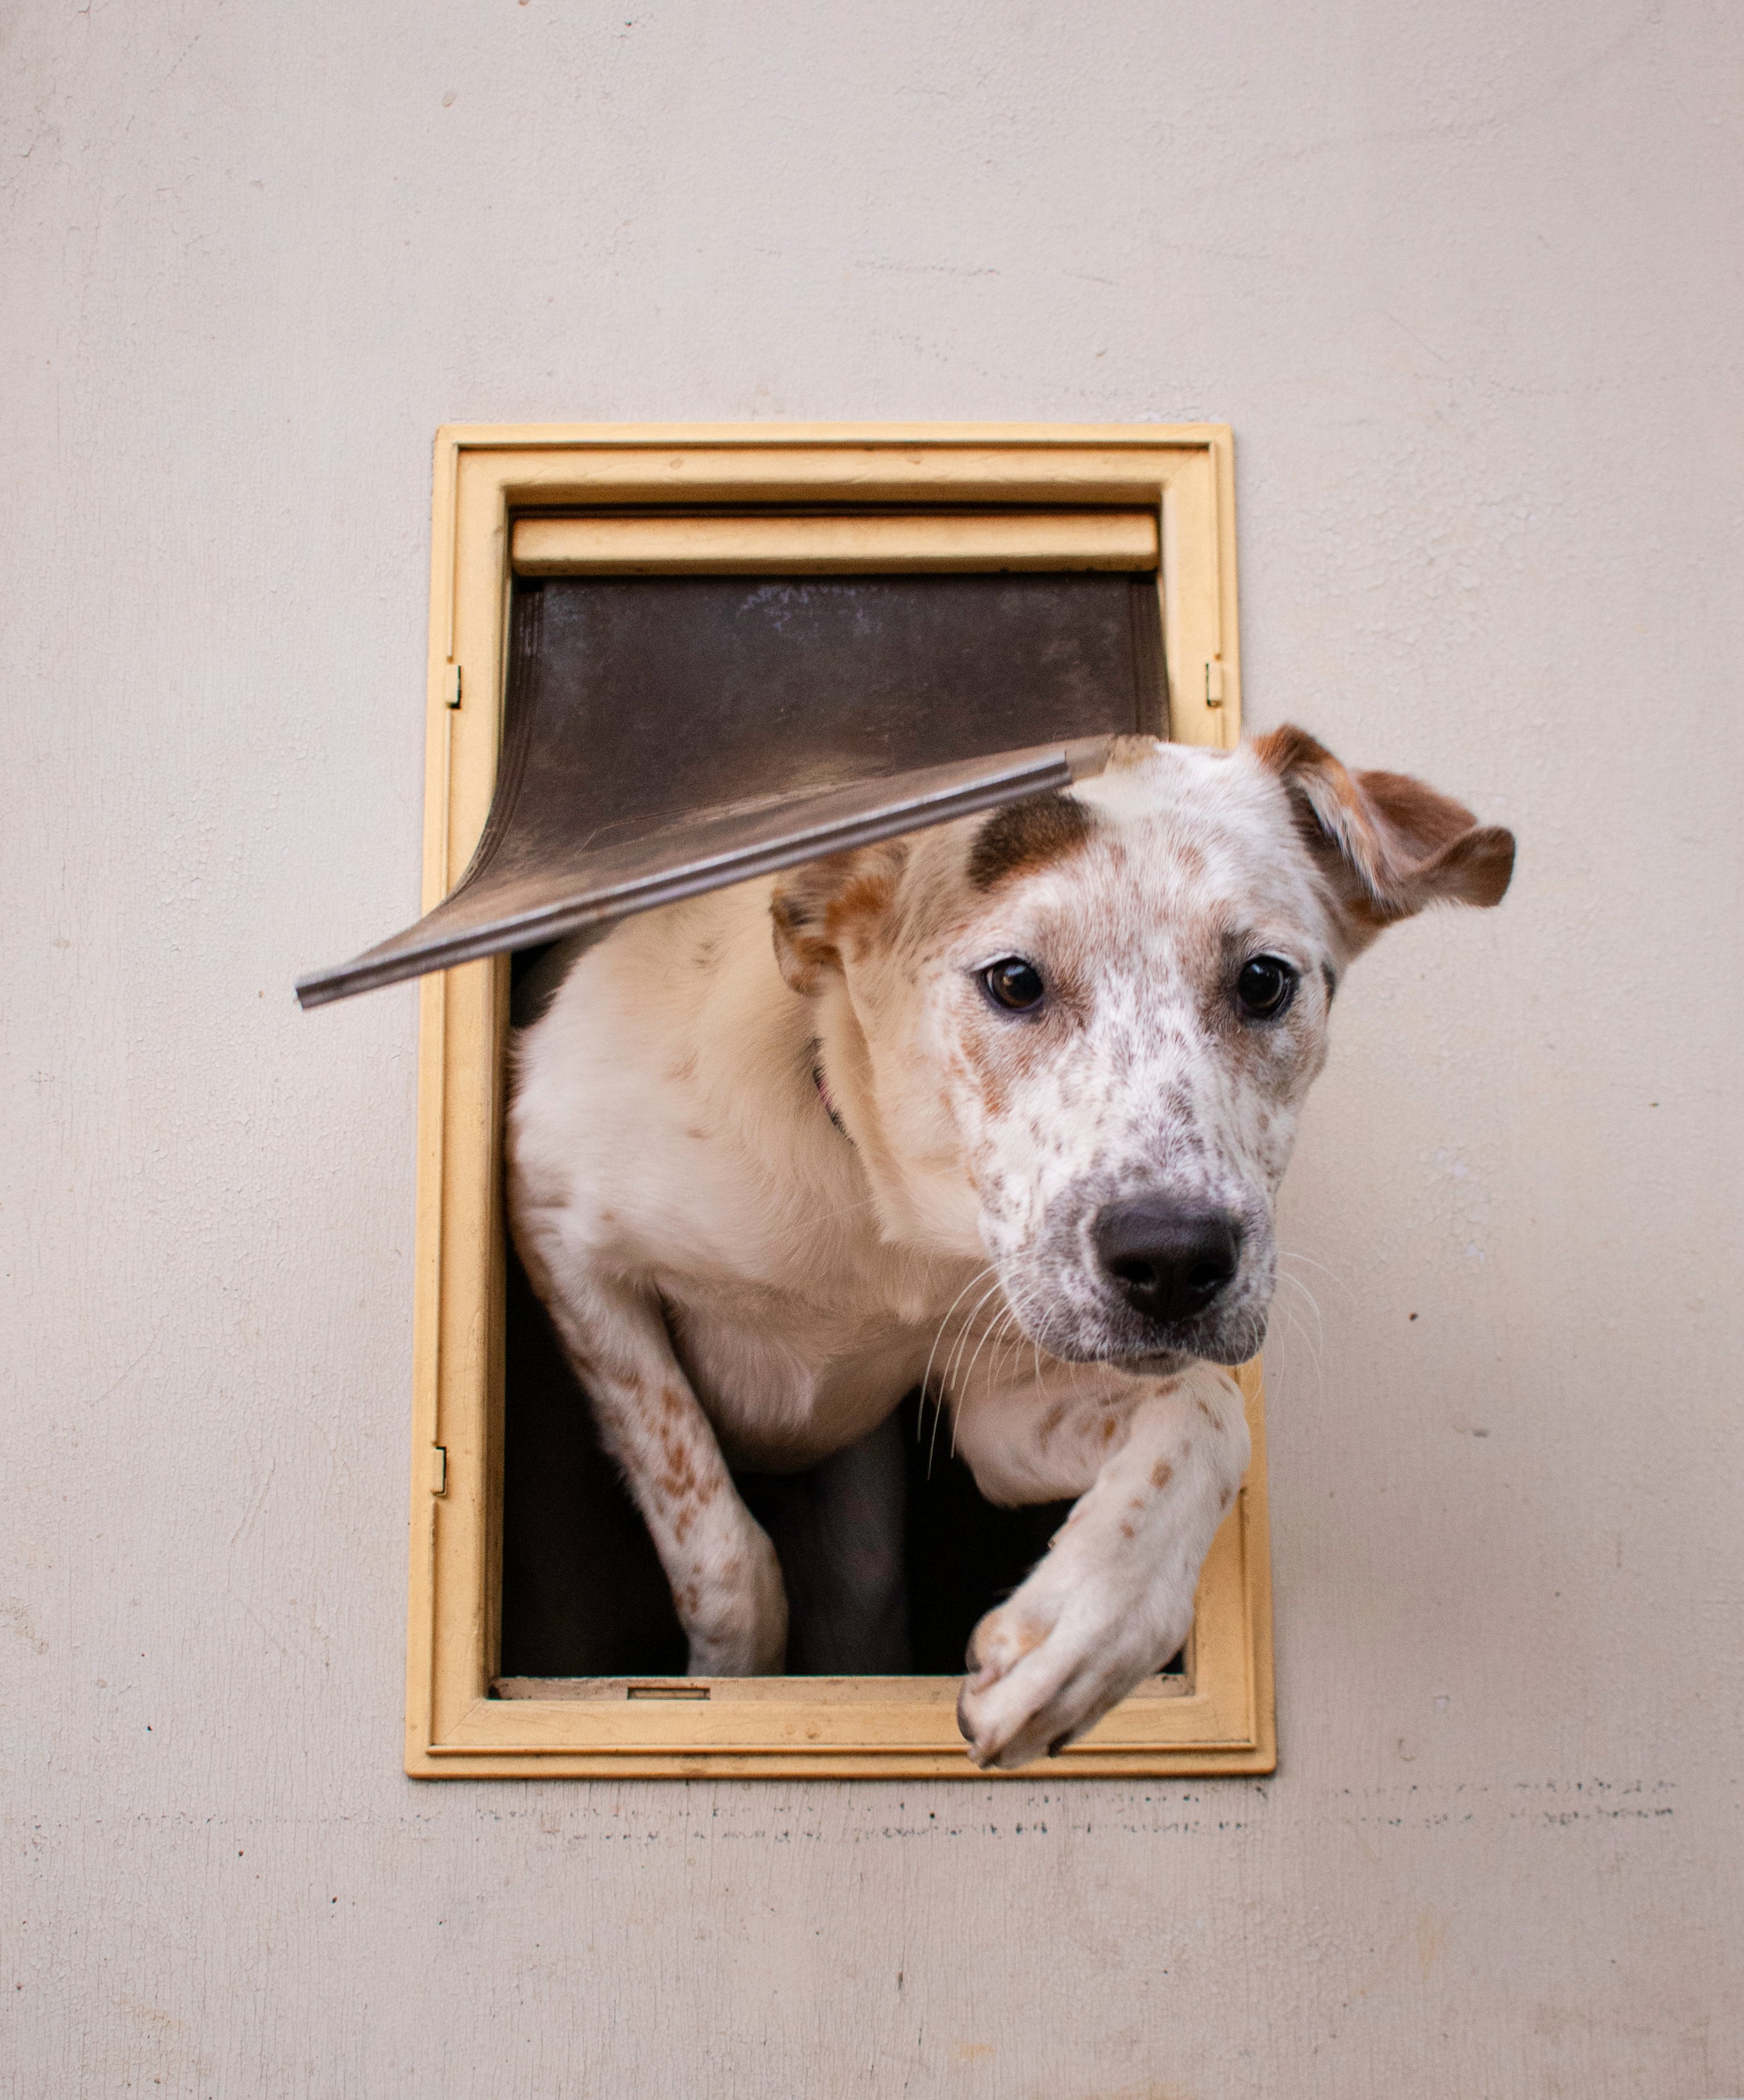 A small dog leaves the house via a doggy door | Photo: Shutterstock/Cole Giles